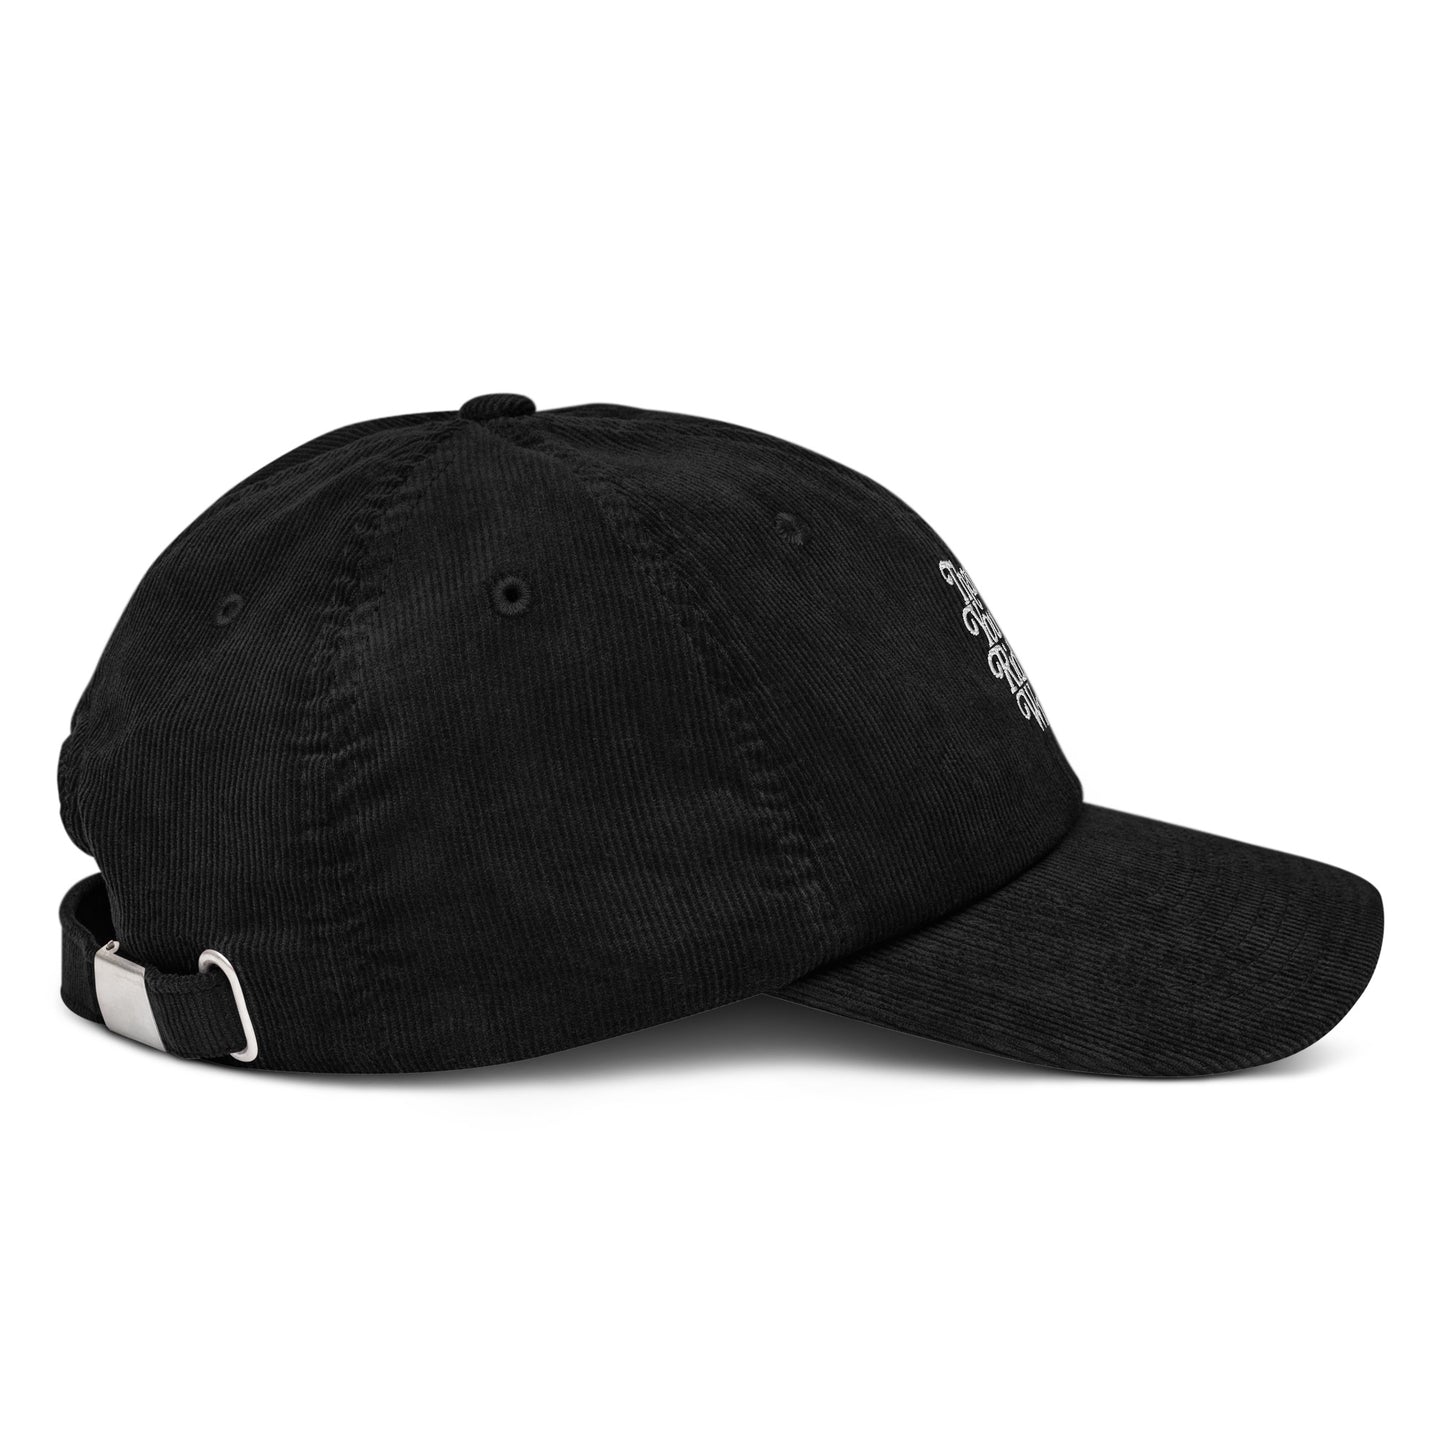 Thank You For Riding With Us! Embroidered Corduroy Cap Black